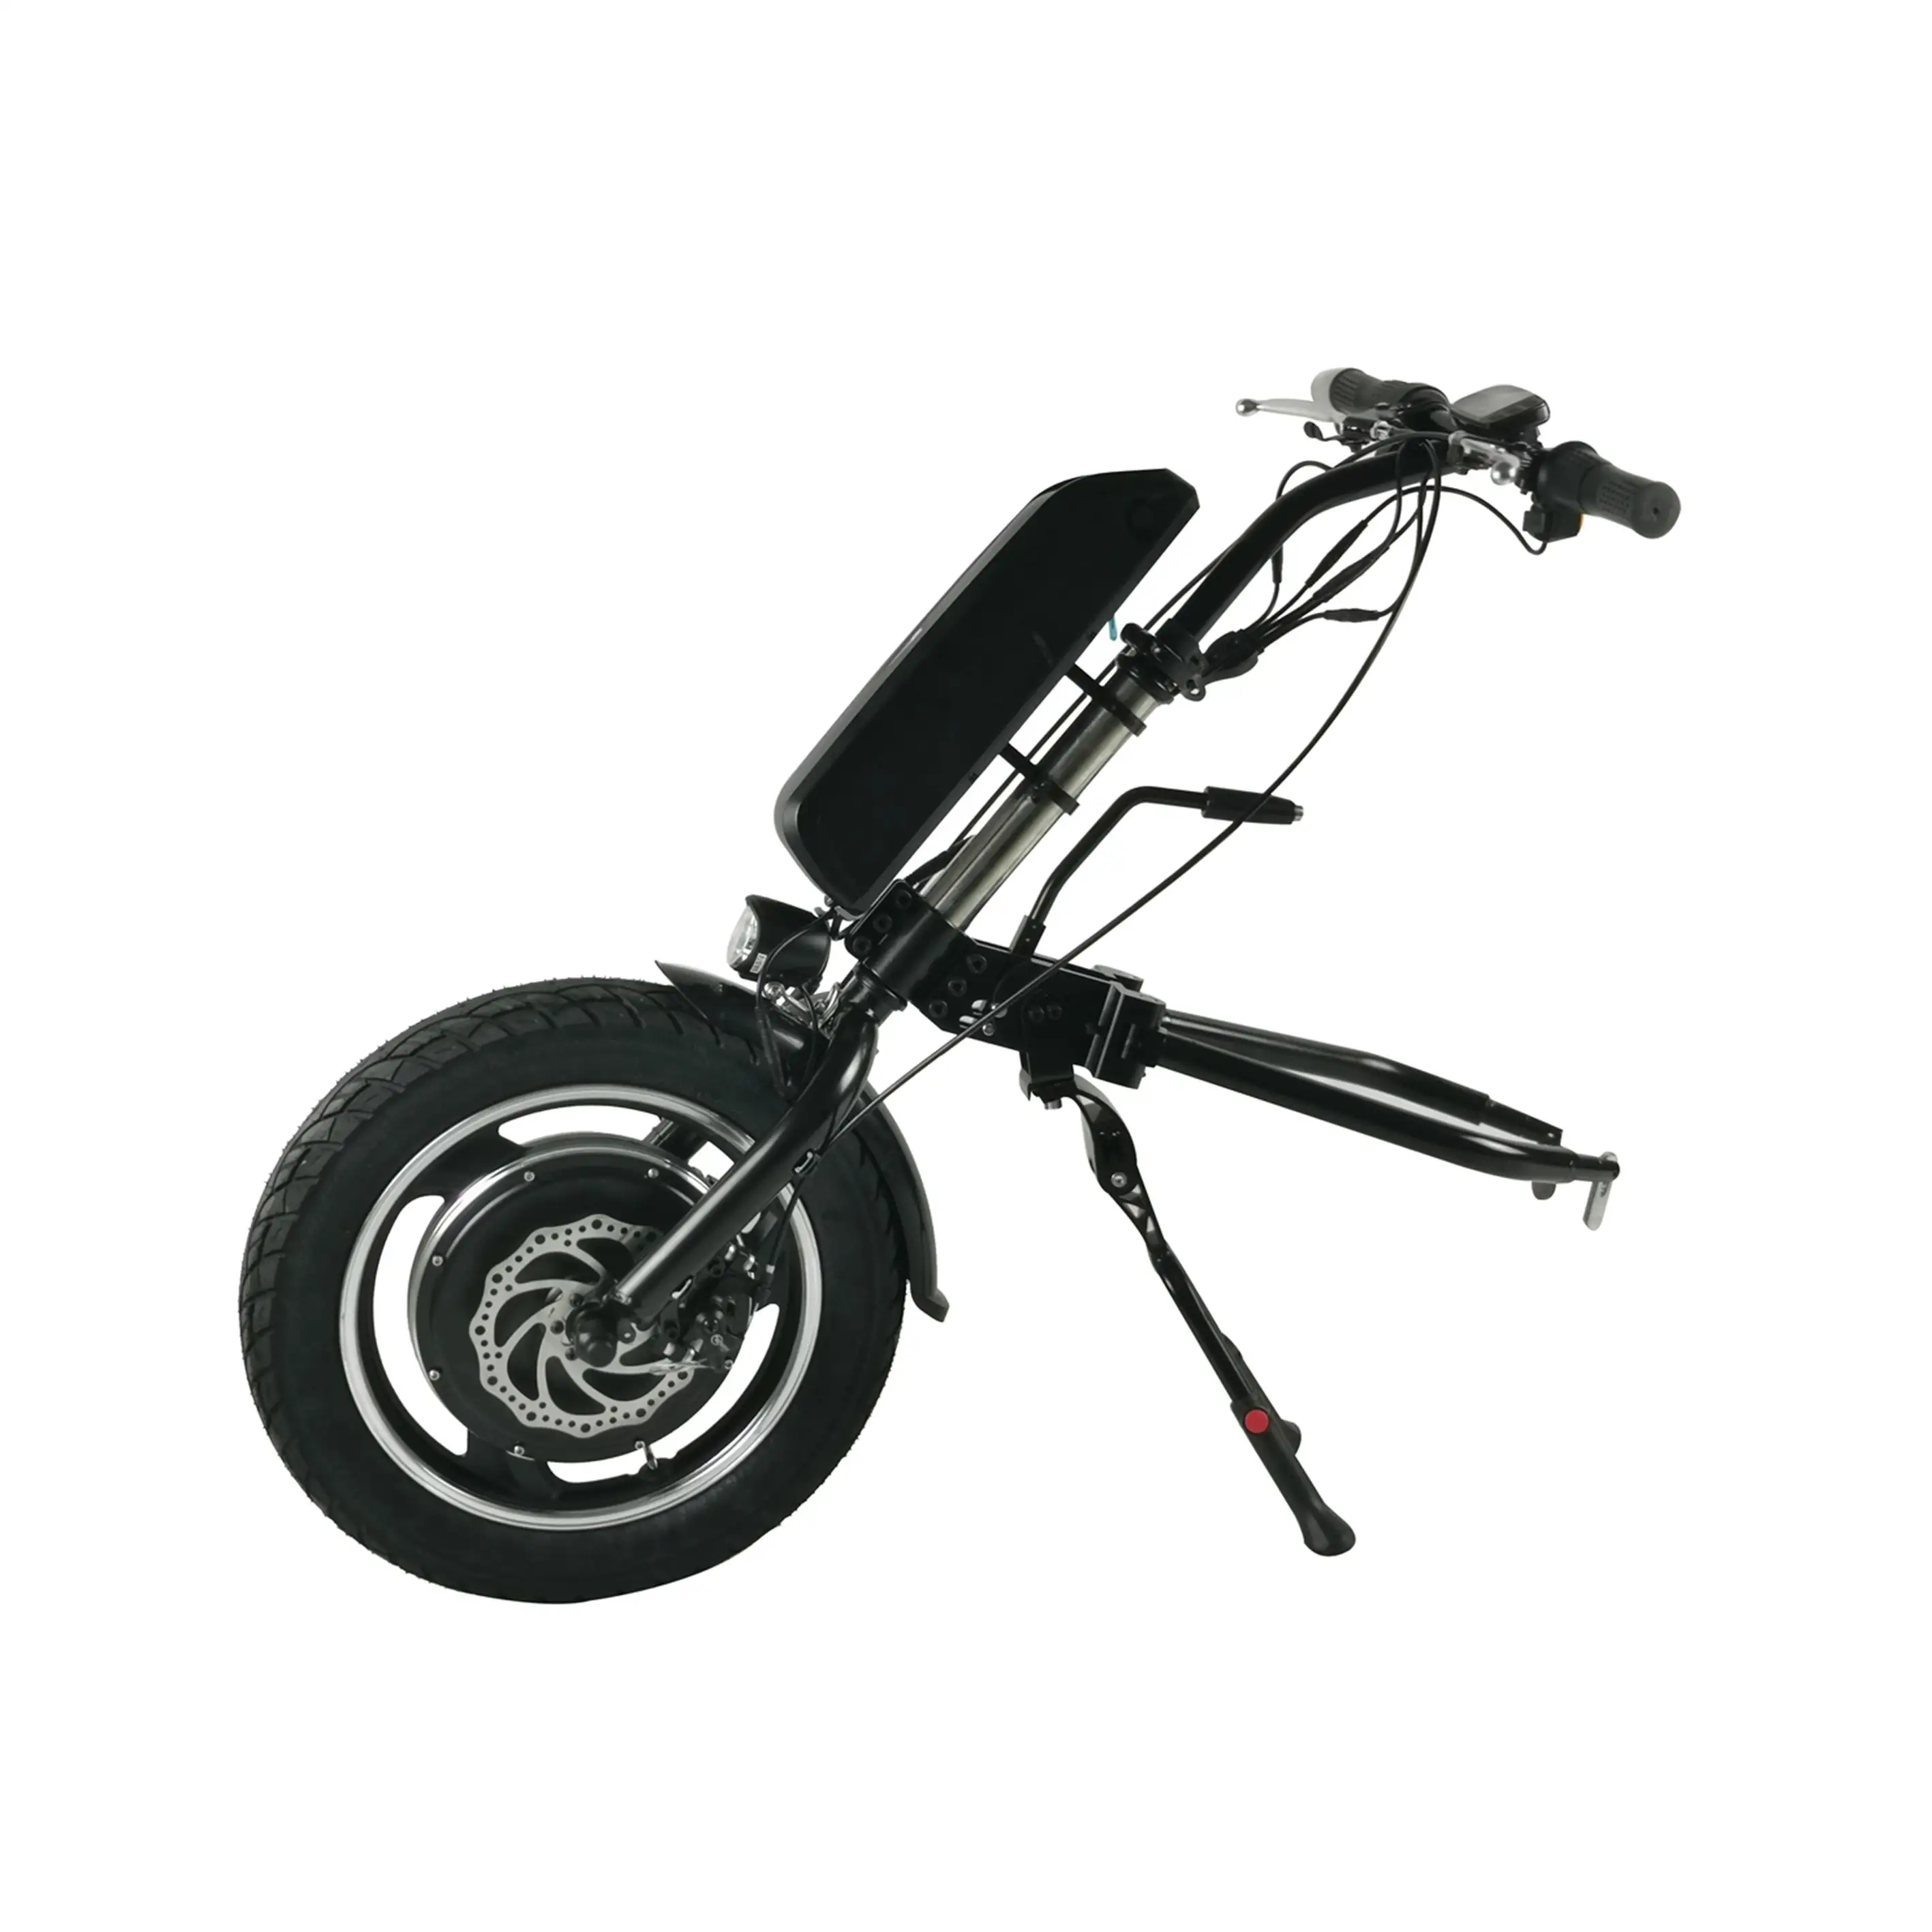 Cheapest electric wheelchair handcycle attachment 500w wheel size for manual wheelchair